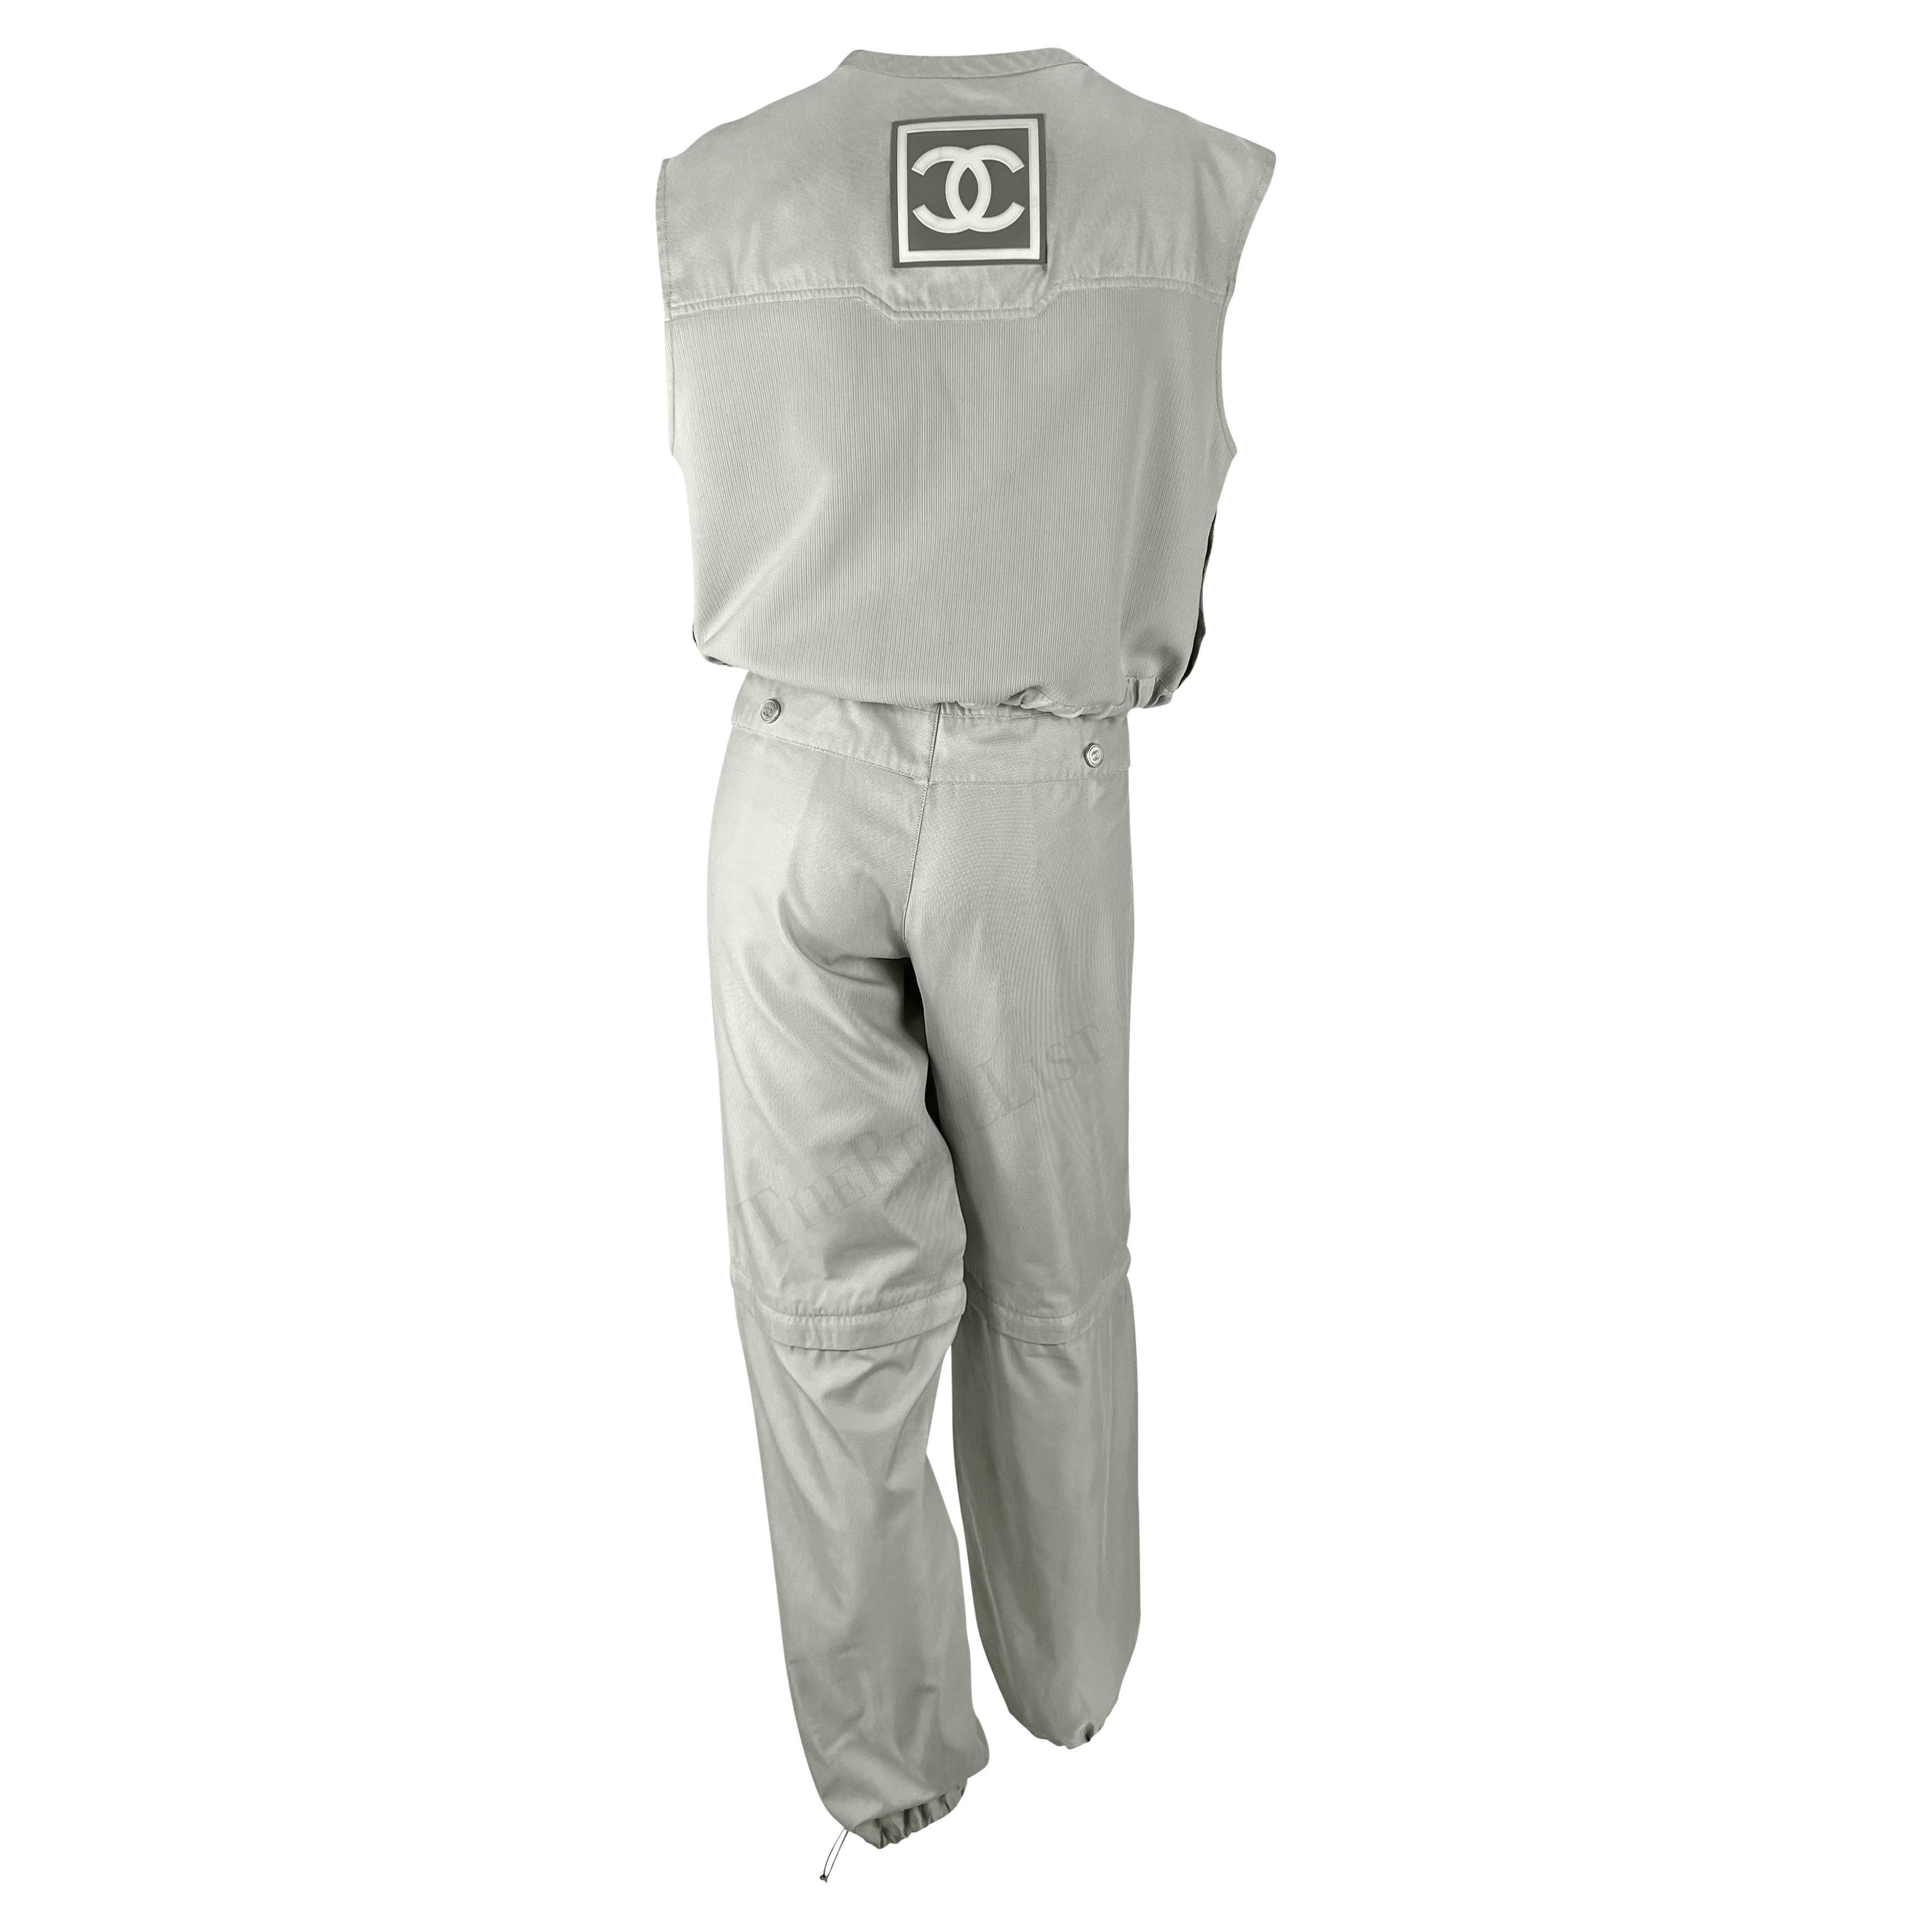 S/S 2001 Chanel by Karl Lagerfeld Identification Crop Top Cargo Pant Set For Sale